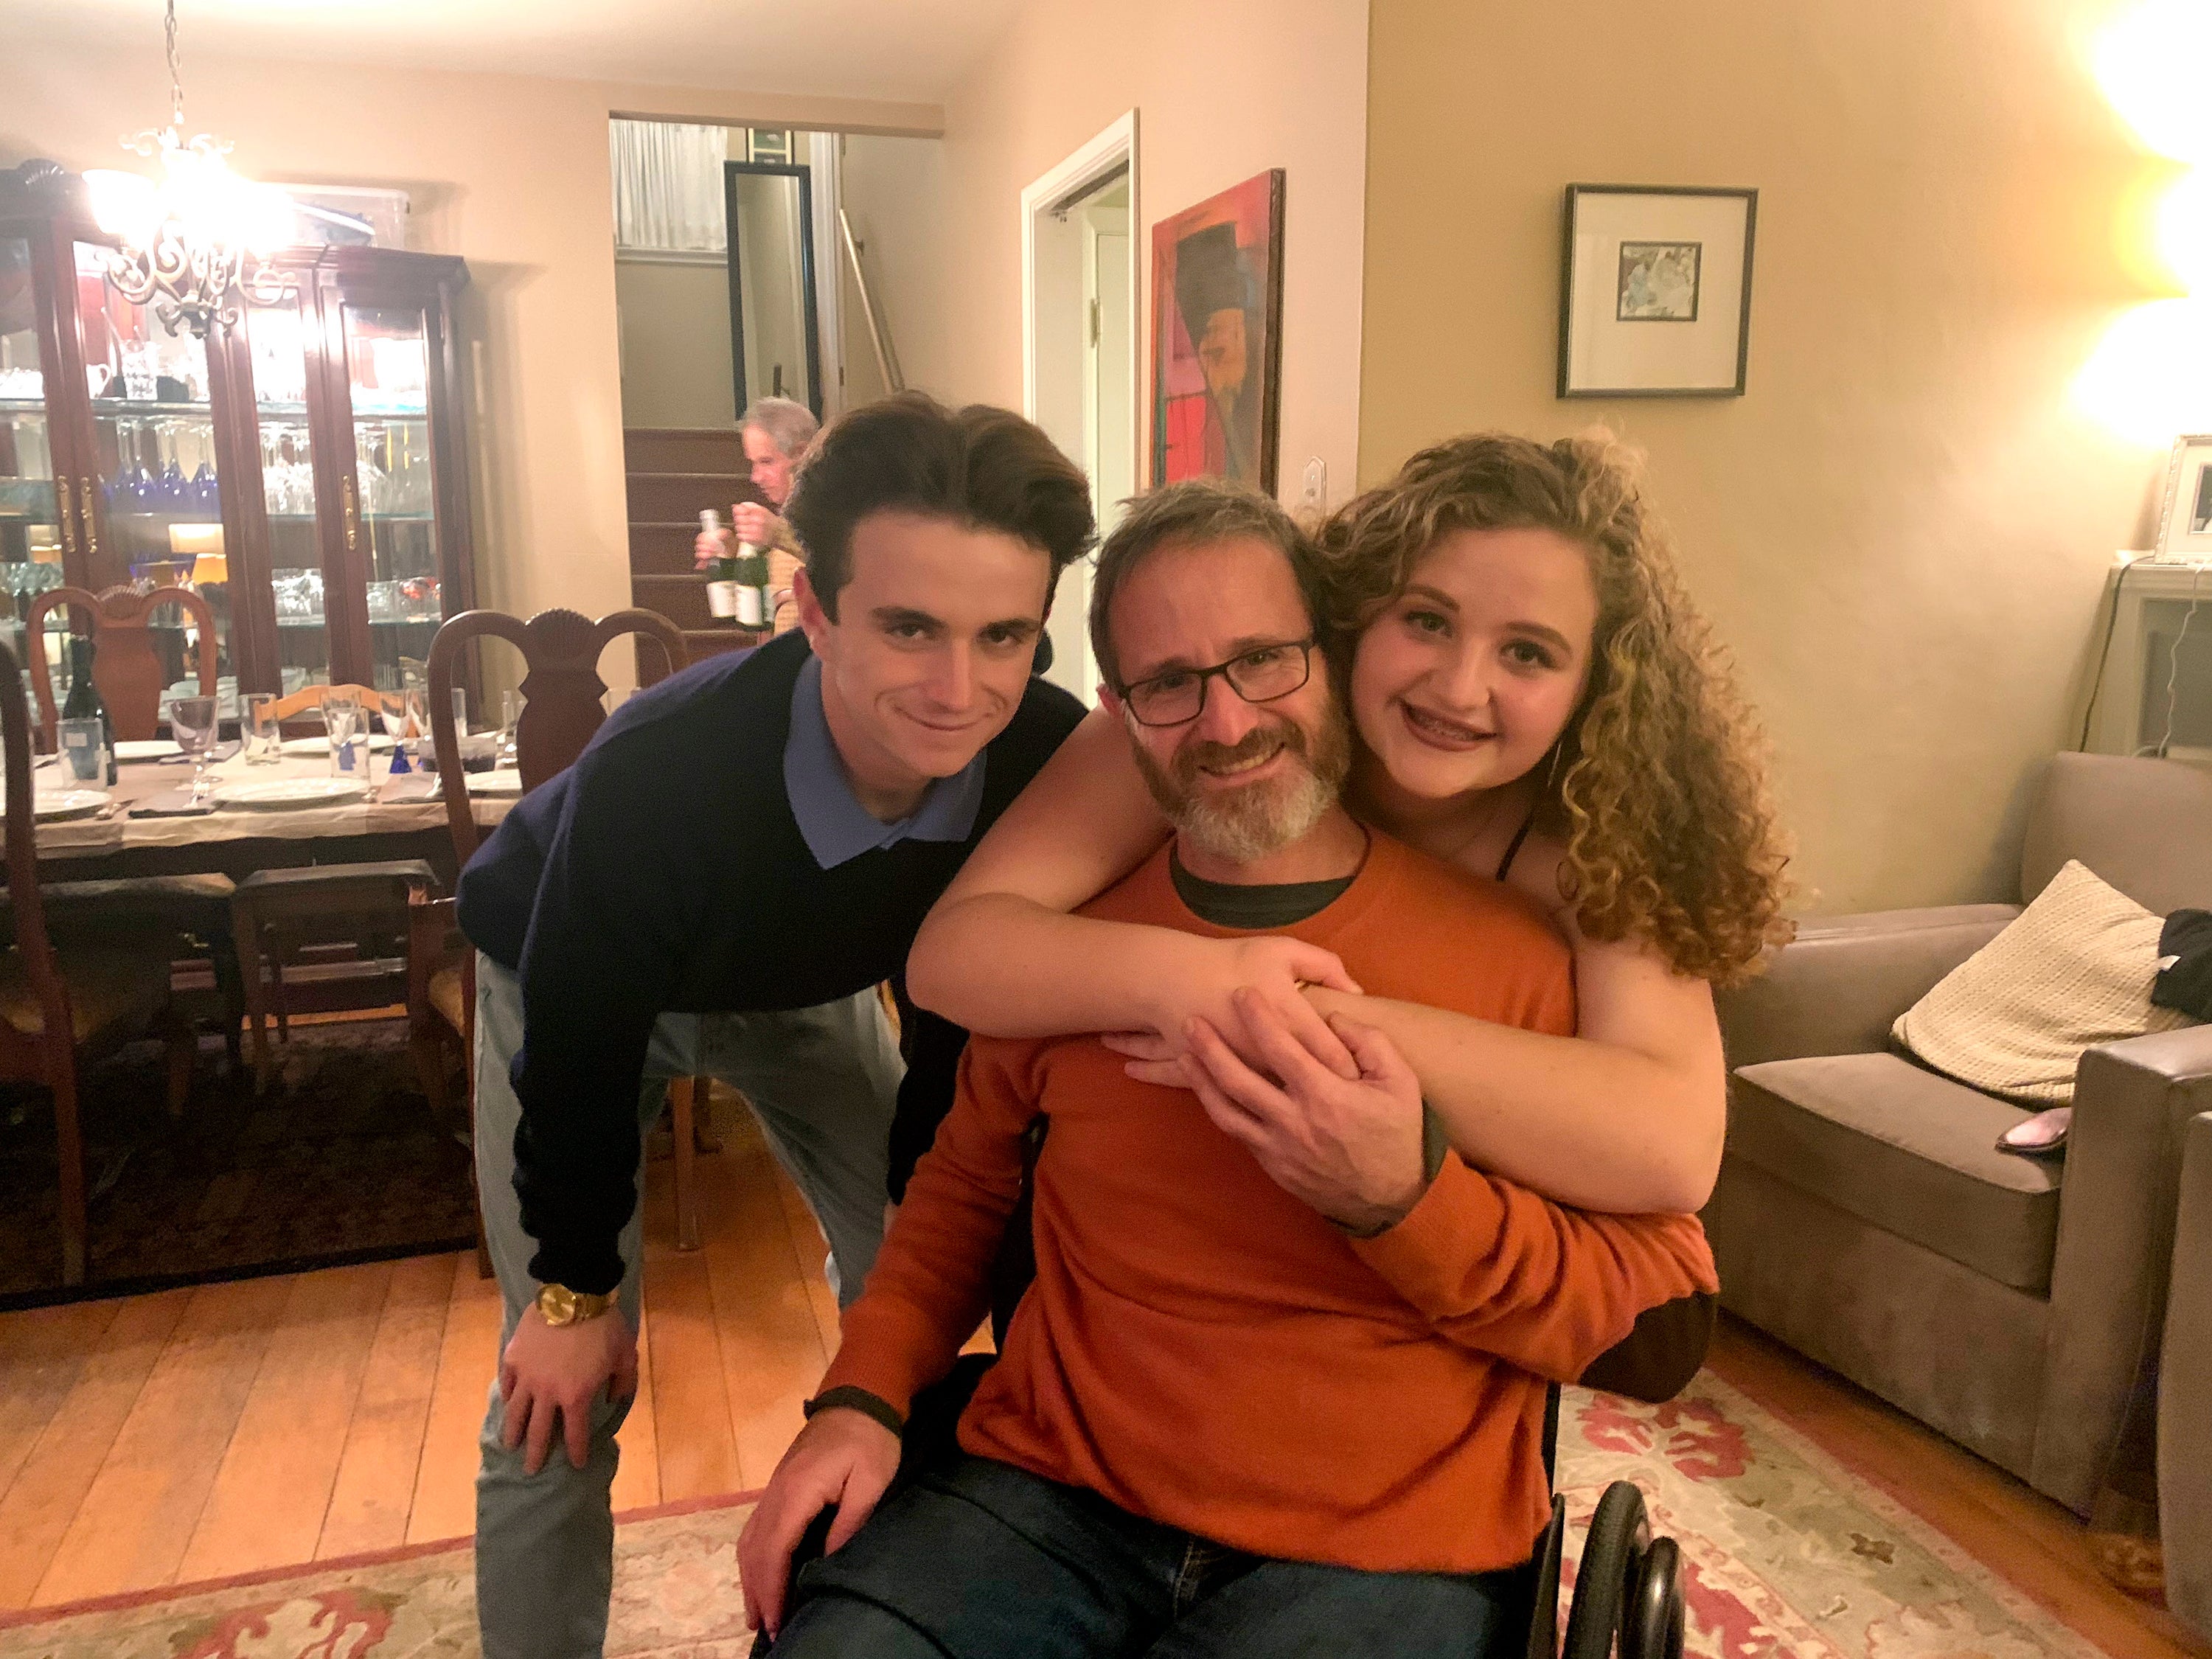 Samuel Kolb, seated, with his son Jacob and daughter Lexi